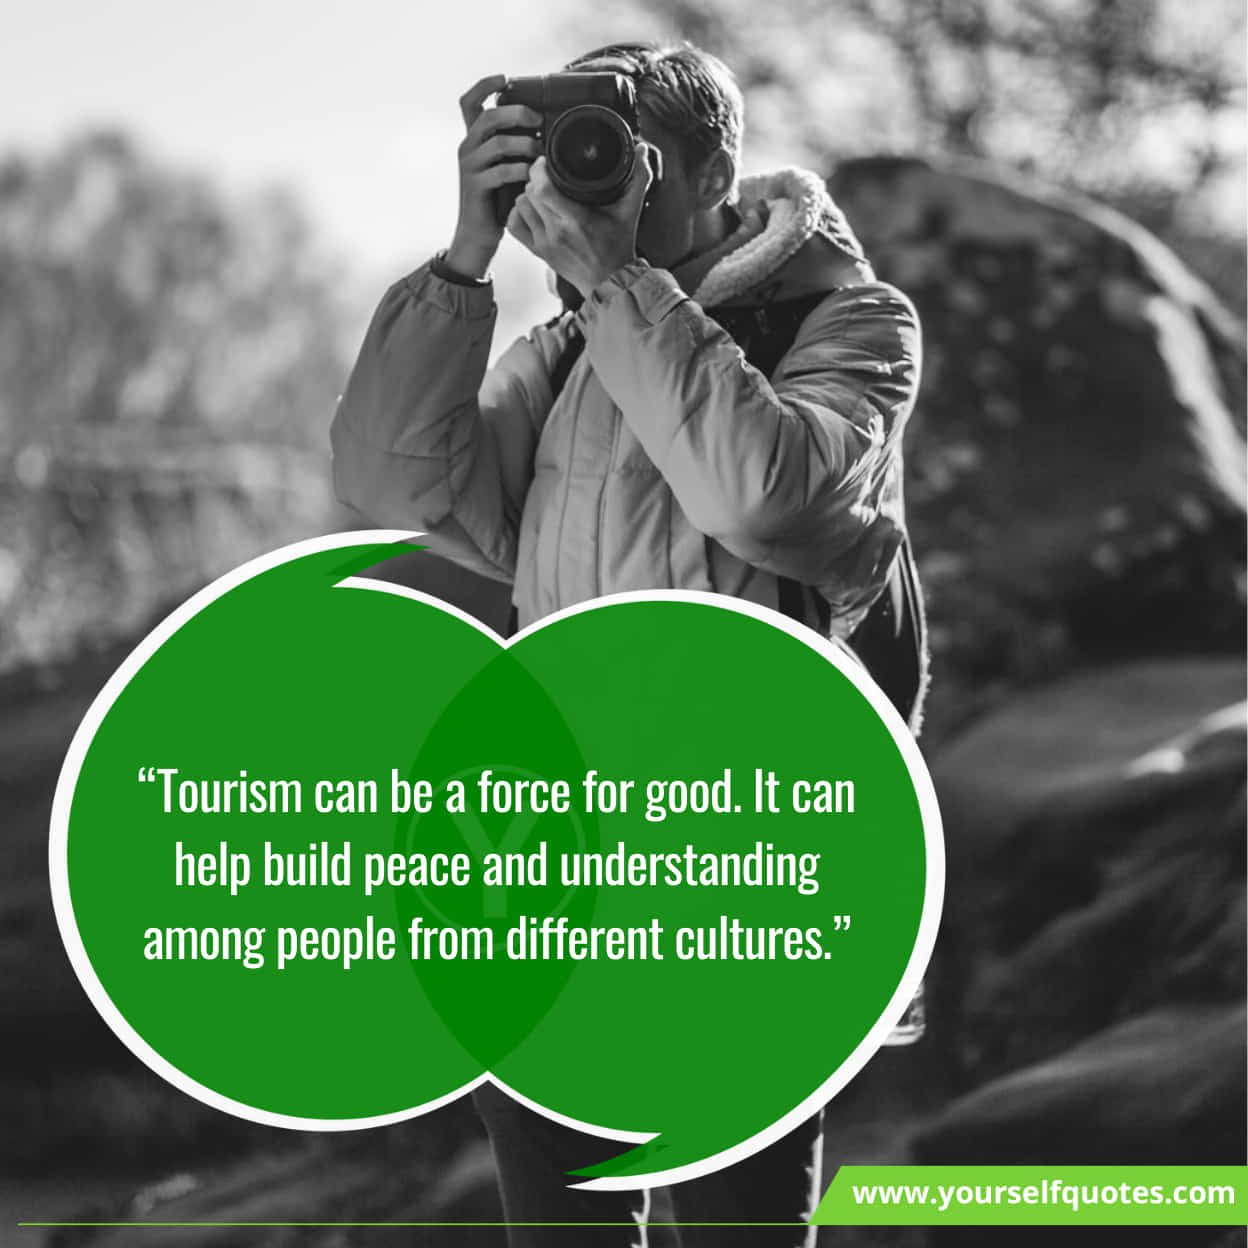 World Tourism Day Quotes